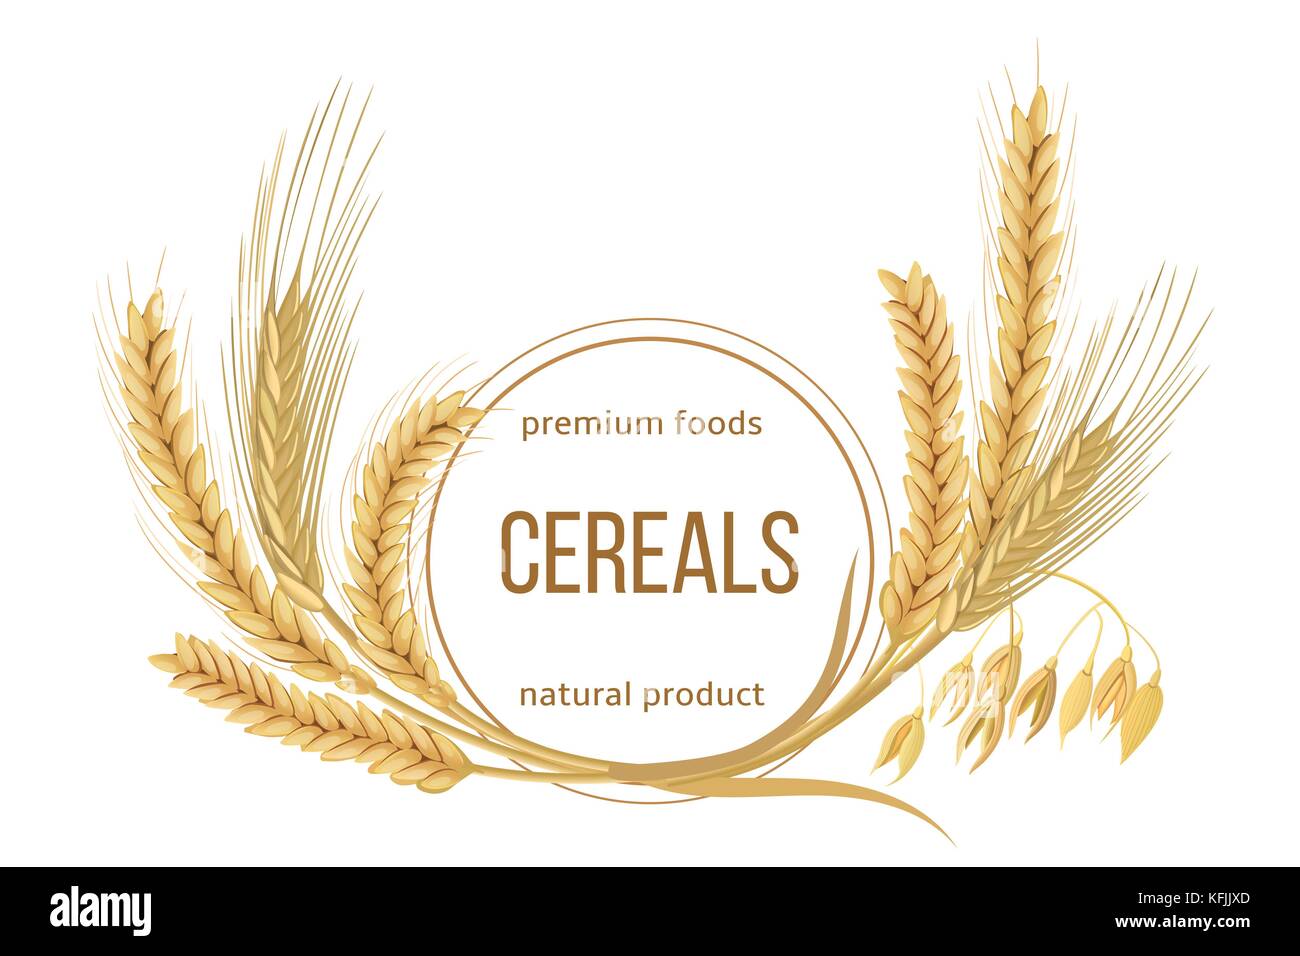 Wheat, barley, oat and rye set. Four cereals spikelets with ears, sheaf and text premium foods, natural product Stock Vector